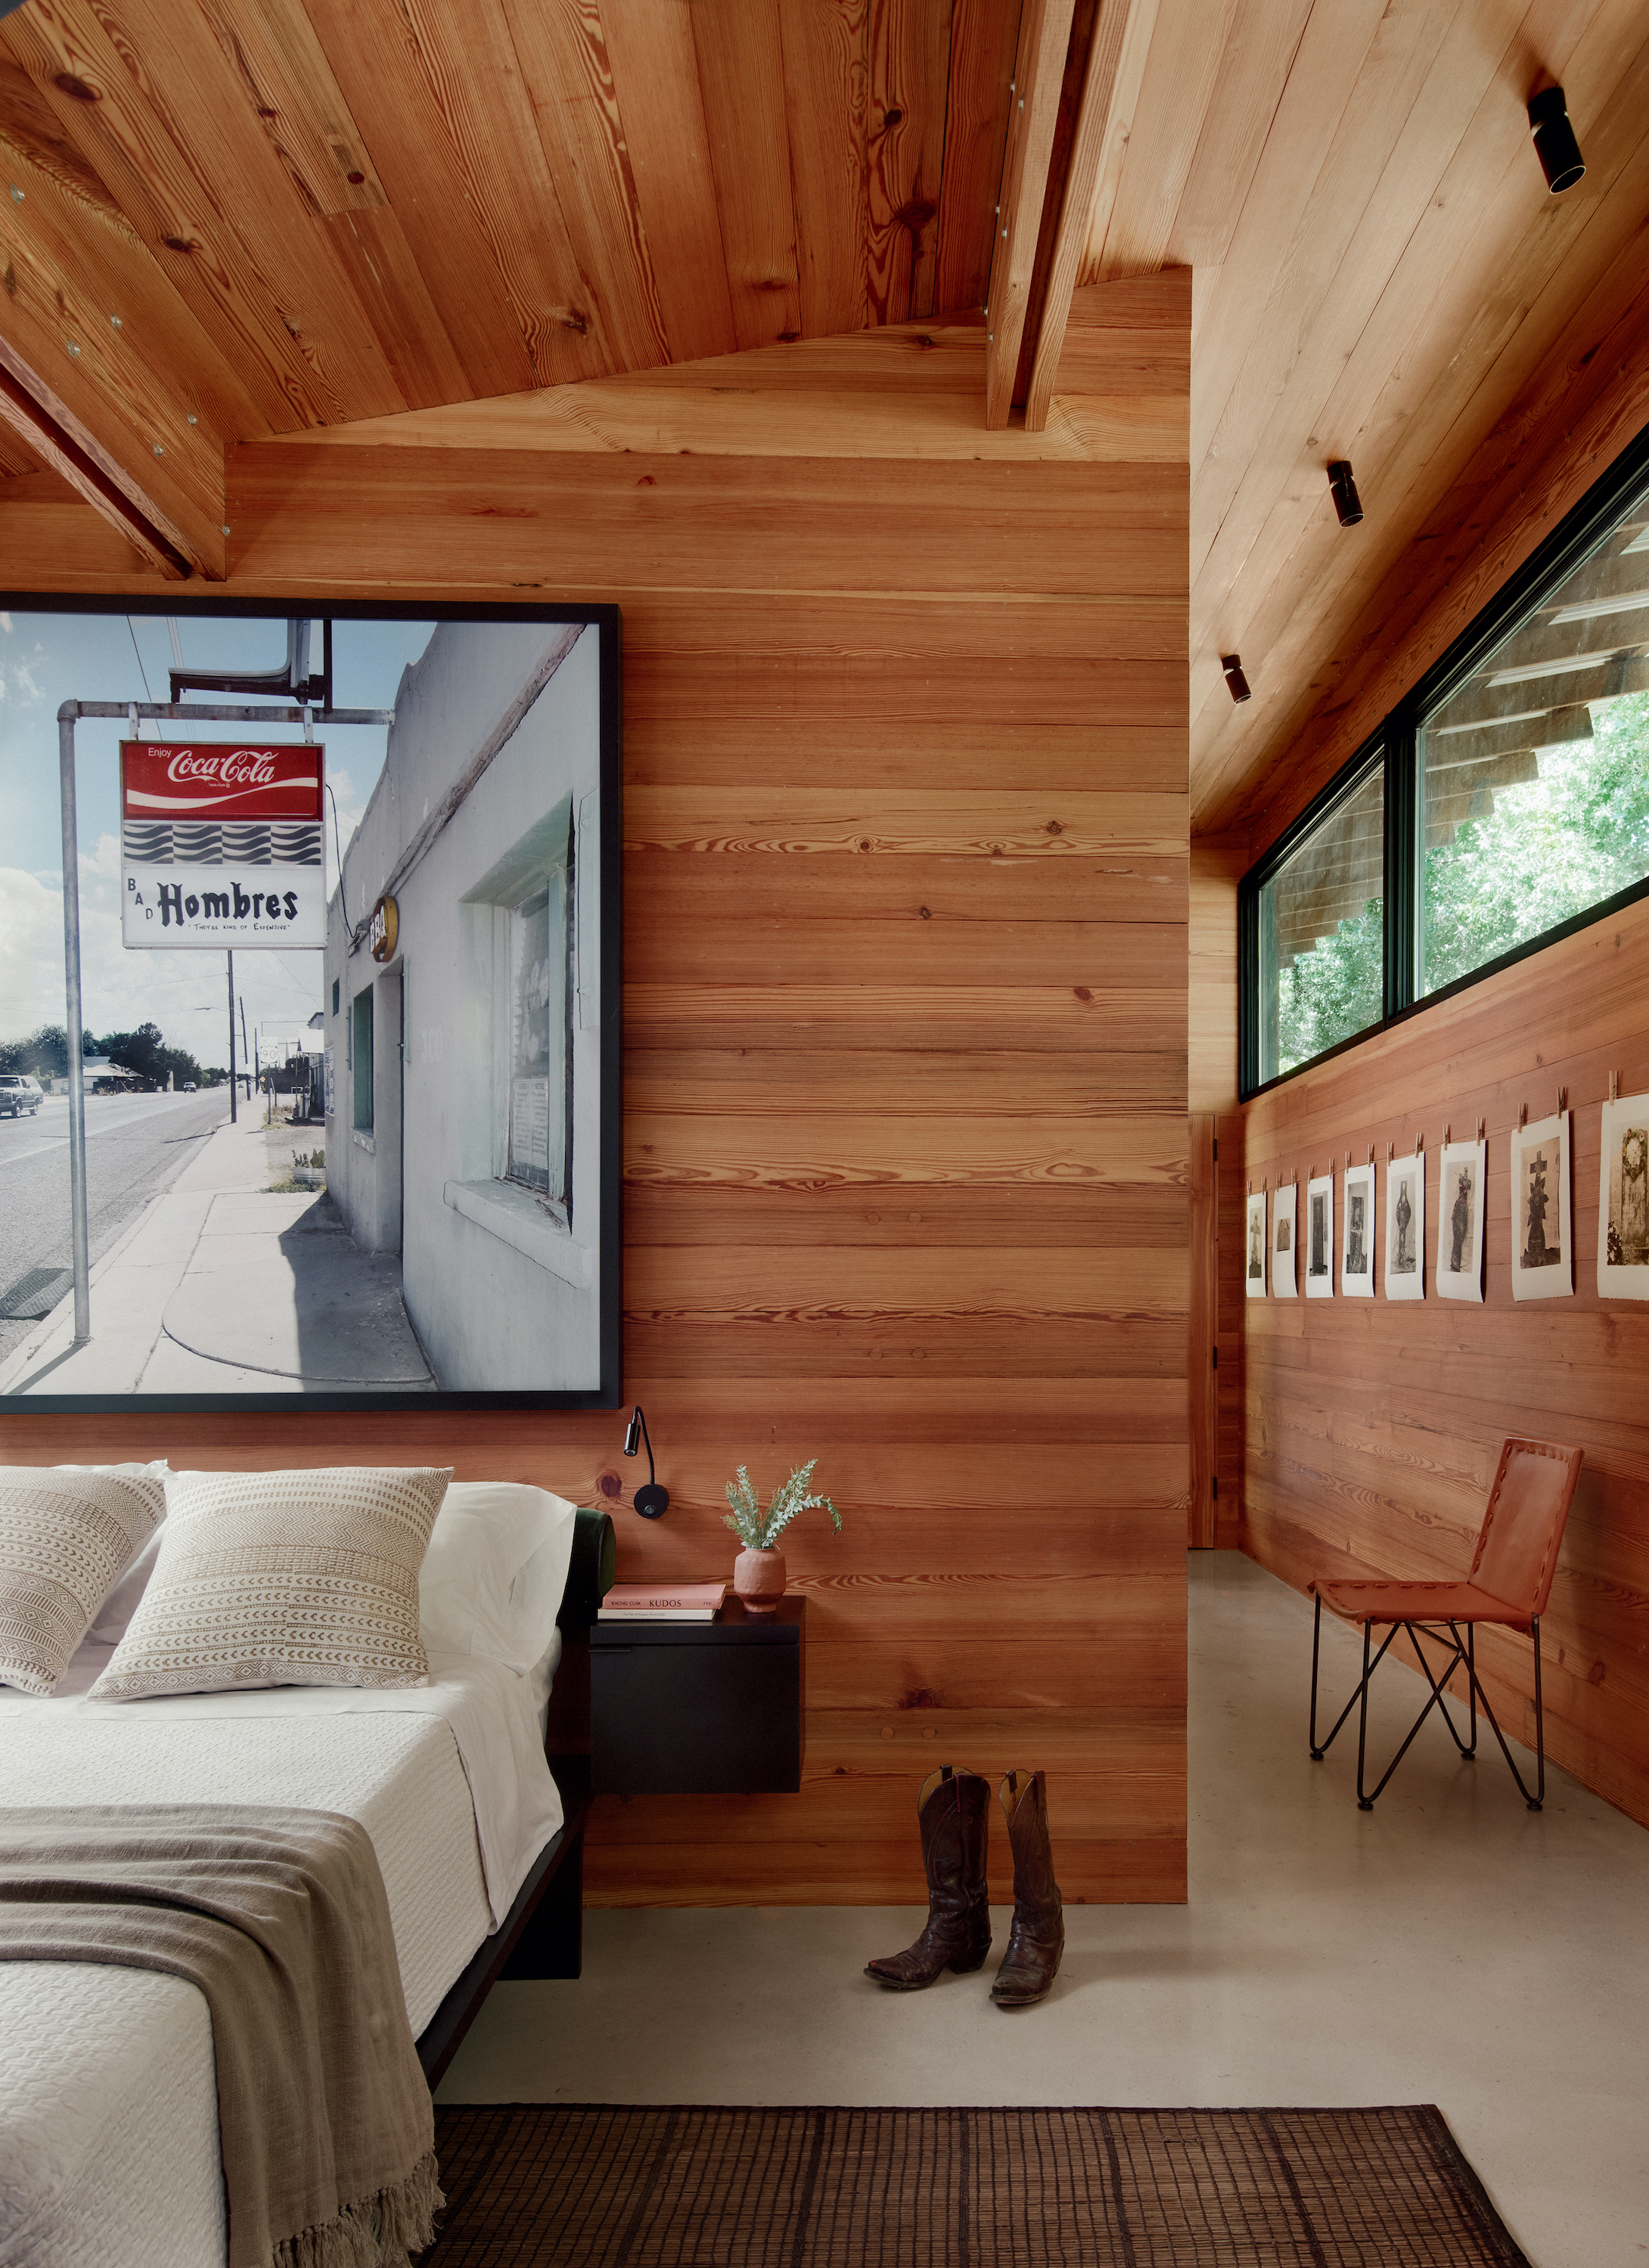 A bedroom with wood walls and a framed photo of a street store sign